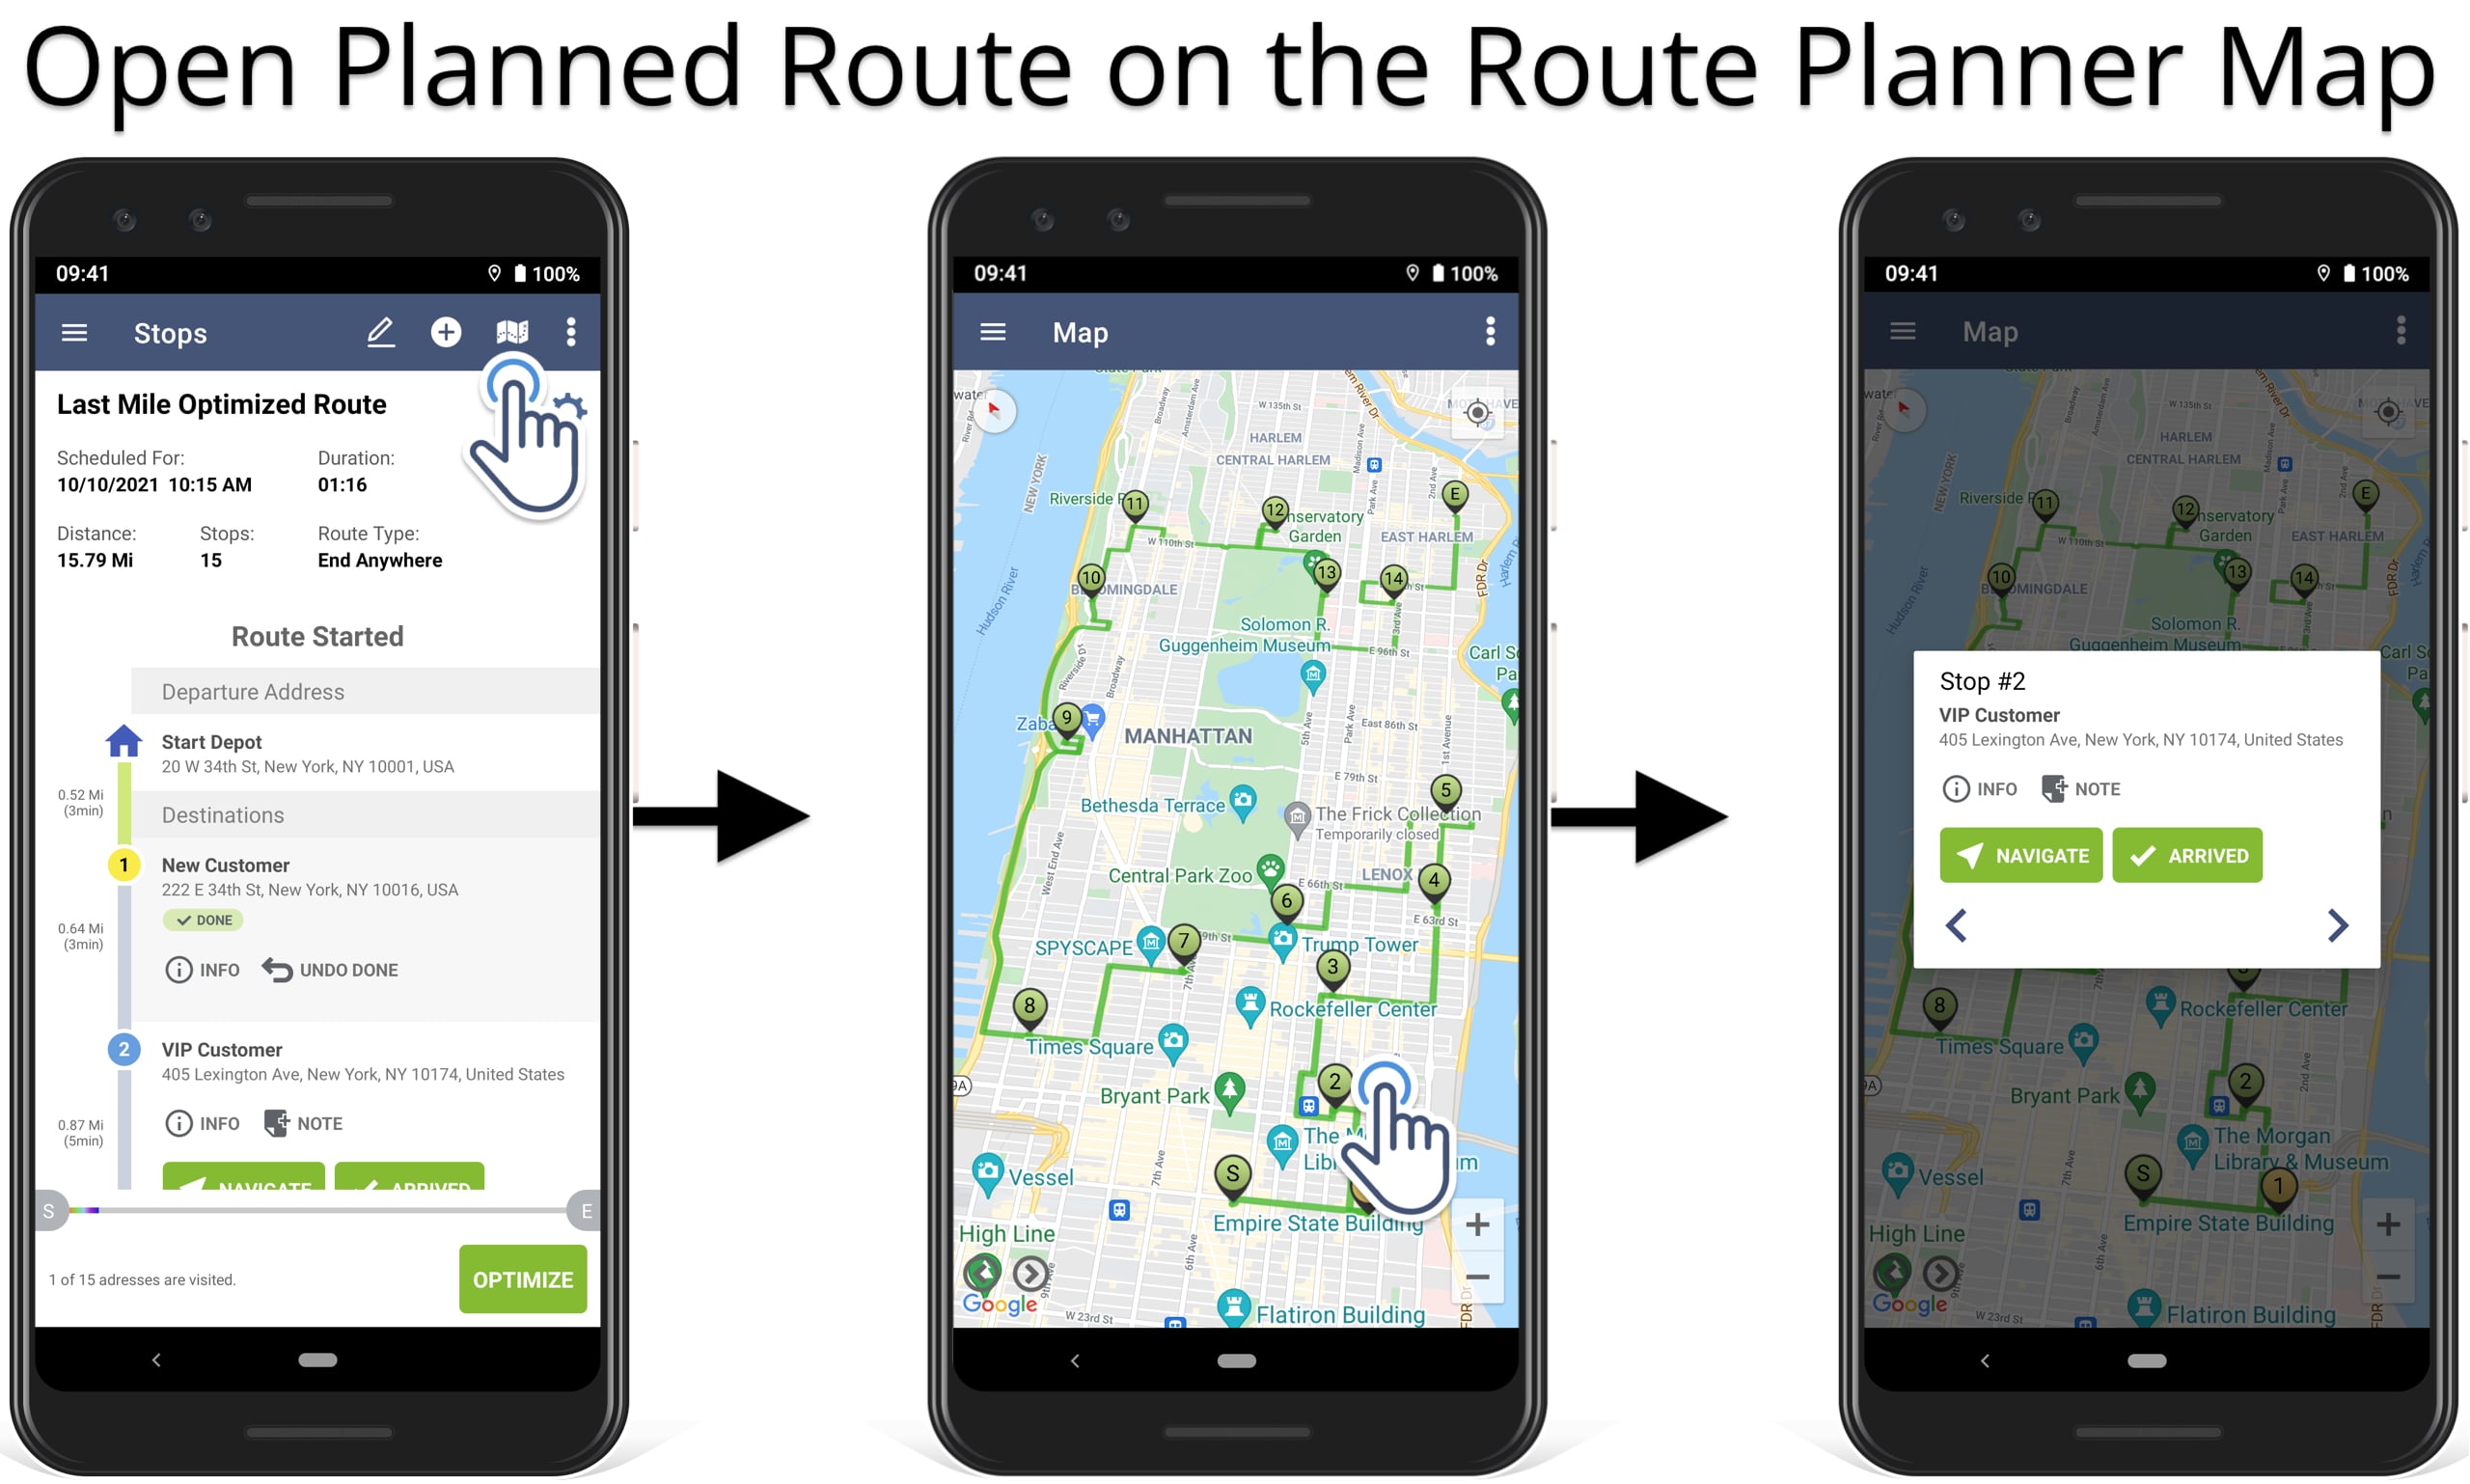 Open and view the route on the map using Route4Me's Mobile Android Route Planner app.